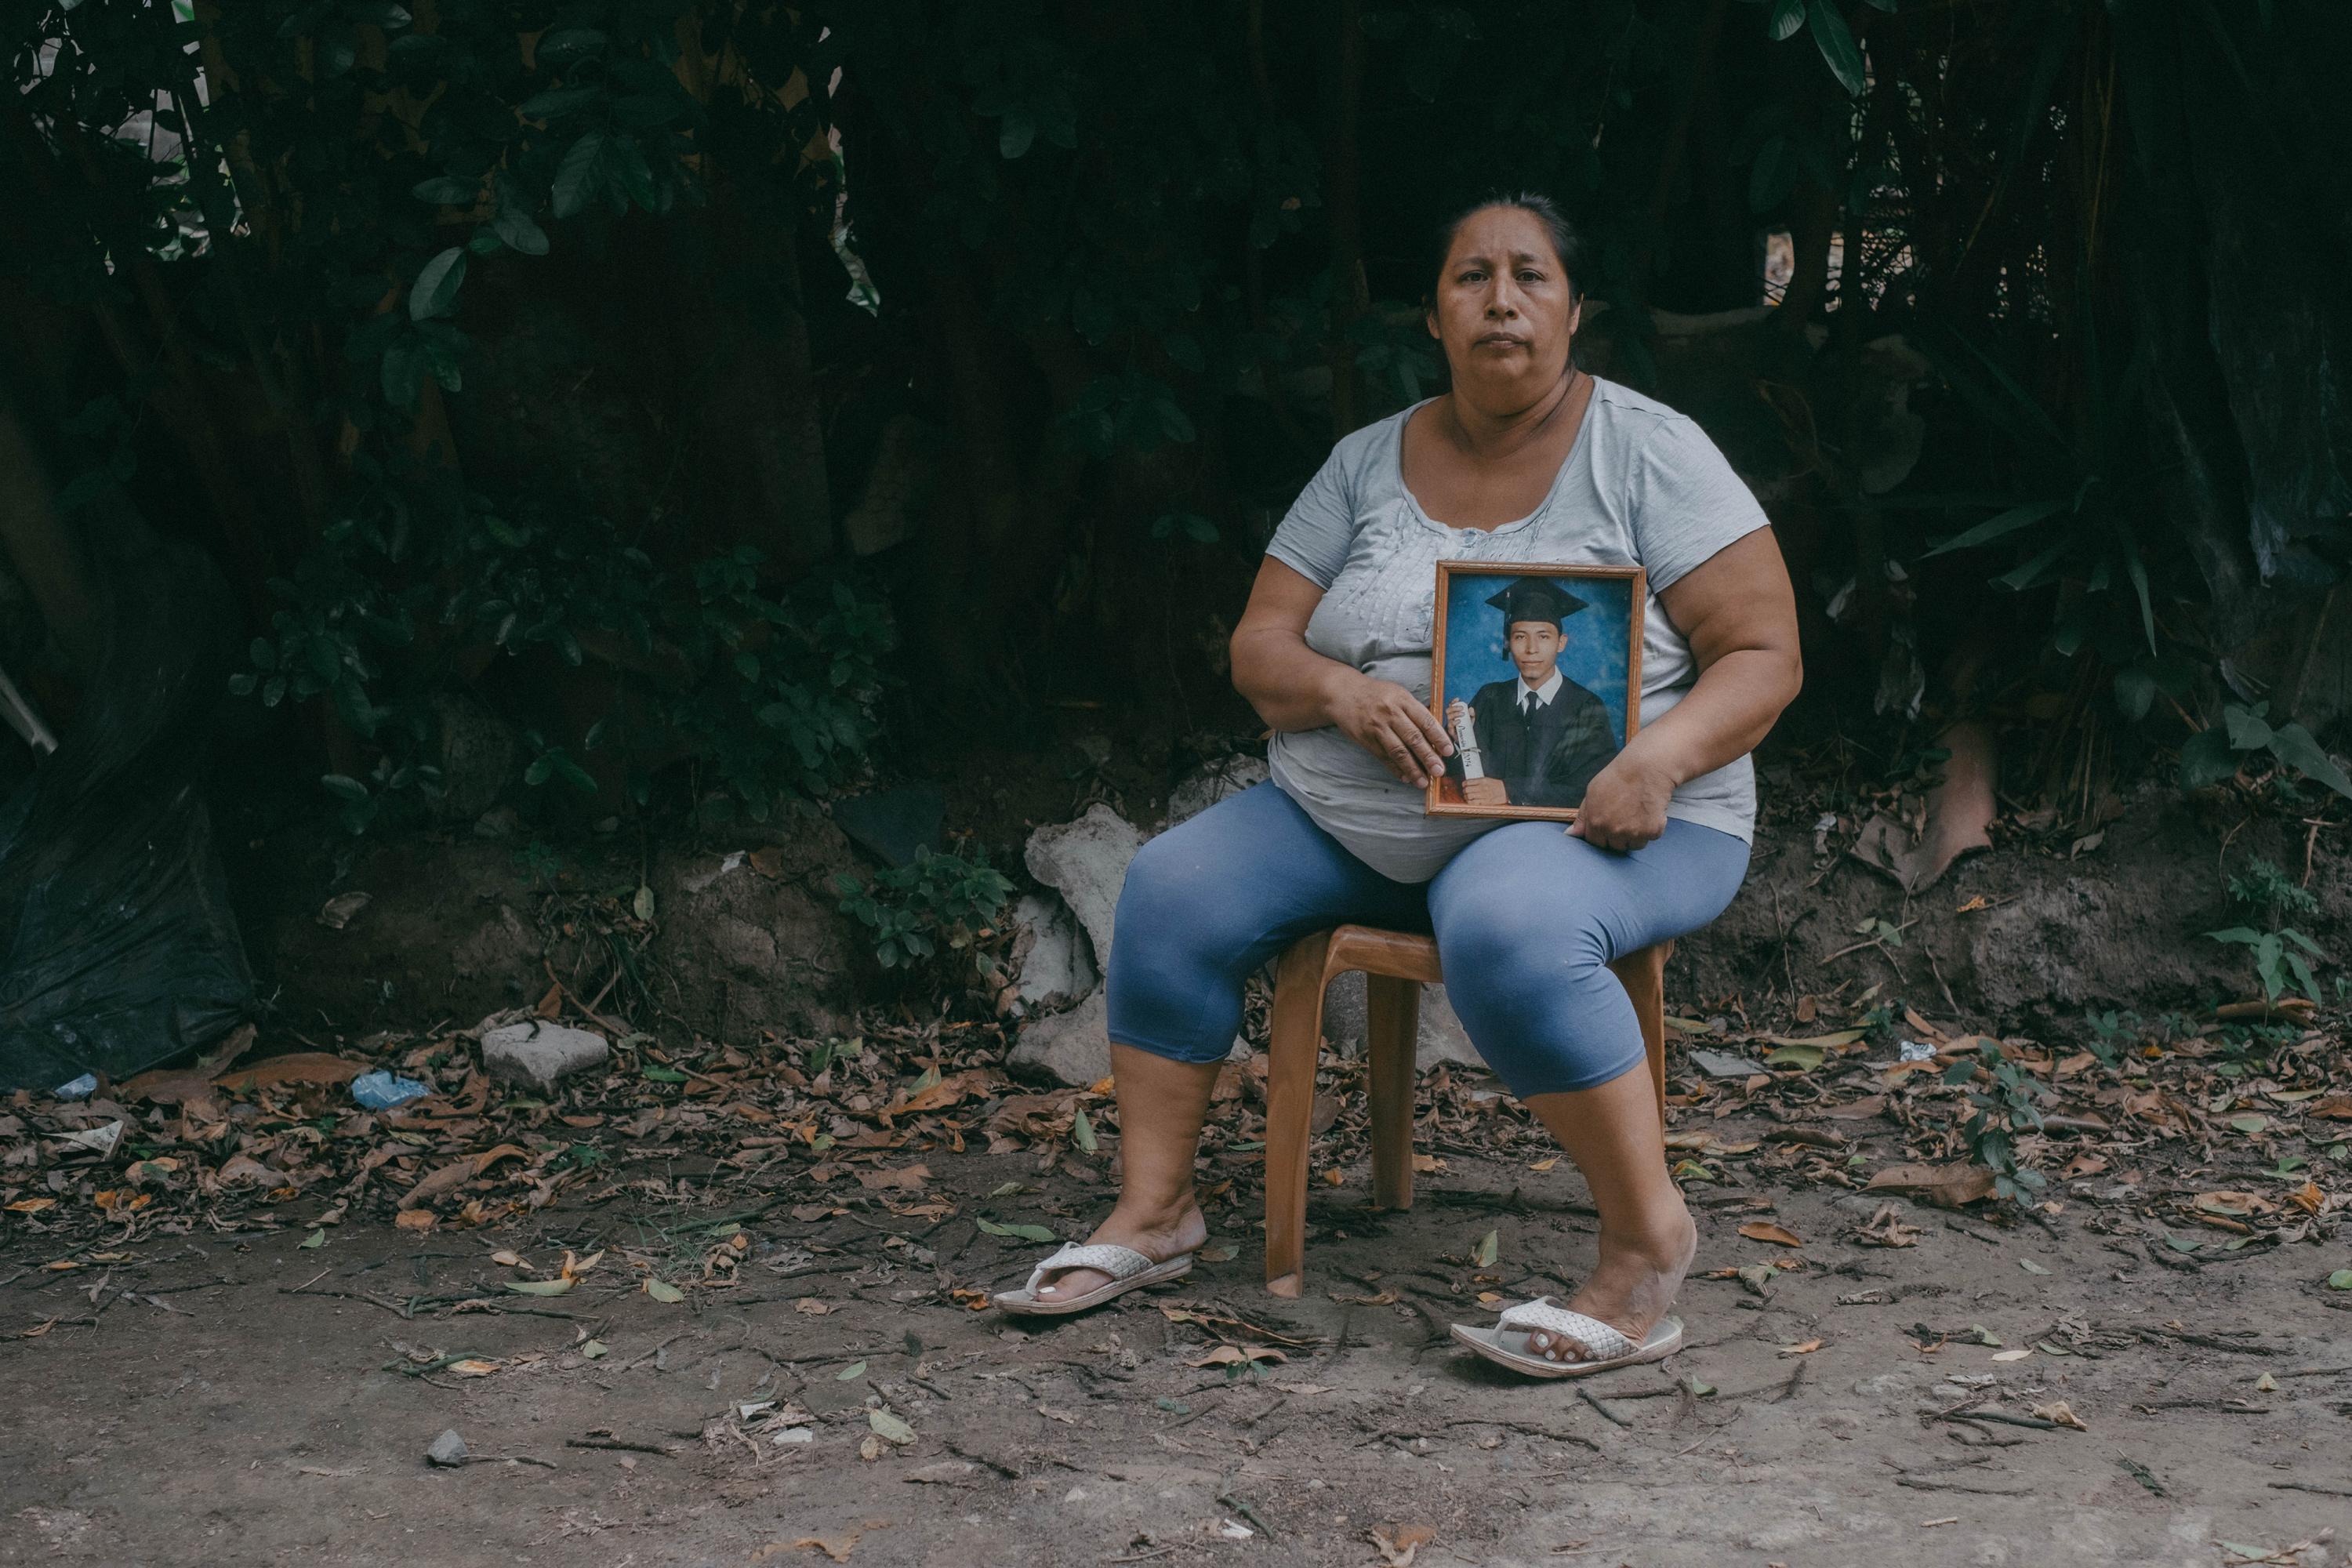 María Maradiaga, 45, lives in the canton of El Botoncillal, miles west of San Salvador in the municipality of Colón. On Apr. 18, 2022, María was at home with her children when a patrol car pulled up and several police officers ordered all the men to come outside. Her two sons were taken away. The younger, Christian, was released hours later after the police recognized his intellectual disability. The other son, Manuel, was sent to Mariona Prison, where he spent 20 days and was released after the authorities determined that he had no criminal record and was not a gang member. A year later, on Apr. 5, 2023, following the murder of a bus service owner in El Botoncillal, the police rearrested several people who had been previously detained by the regime, including Manuel. After 13 months, Manuel is still in Mariona. His family no longer eats meat; María takes care of two elderly women Monday through Friday, earning five dollars a day to buy beans, rice and sometimes eggs. In 2019, she and Manuel, who was 25 years old at the time, voted for Nayib Bukele. “In the last elections, I didn’t vote for him again. He left us without the person who put food on our table. We stopped buying food so we could pay for the $80 package we have to assemble every two months to deliver to my son. Bukele plunged us into poverty,” Maria says. Since 2019, more than 210,000 Salvadorans have fallen into extreme poverty and almost one million are on the brink of starvation. Photo by Carlos Barrera.